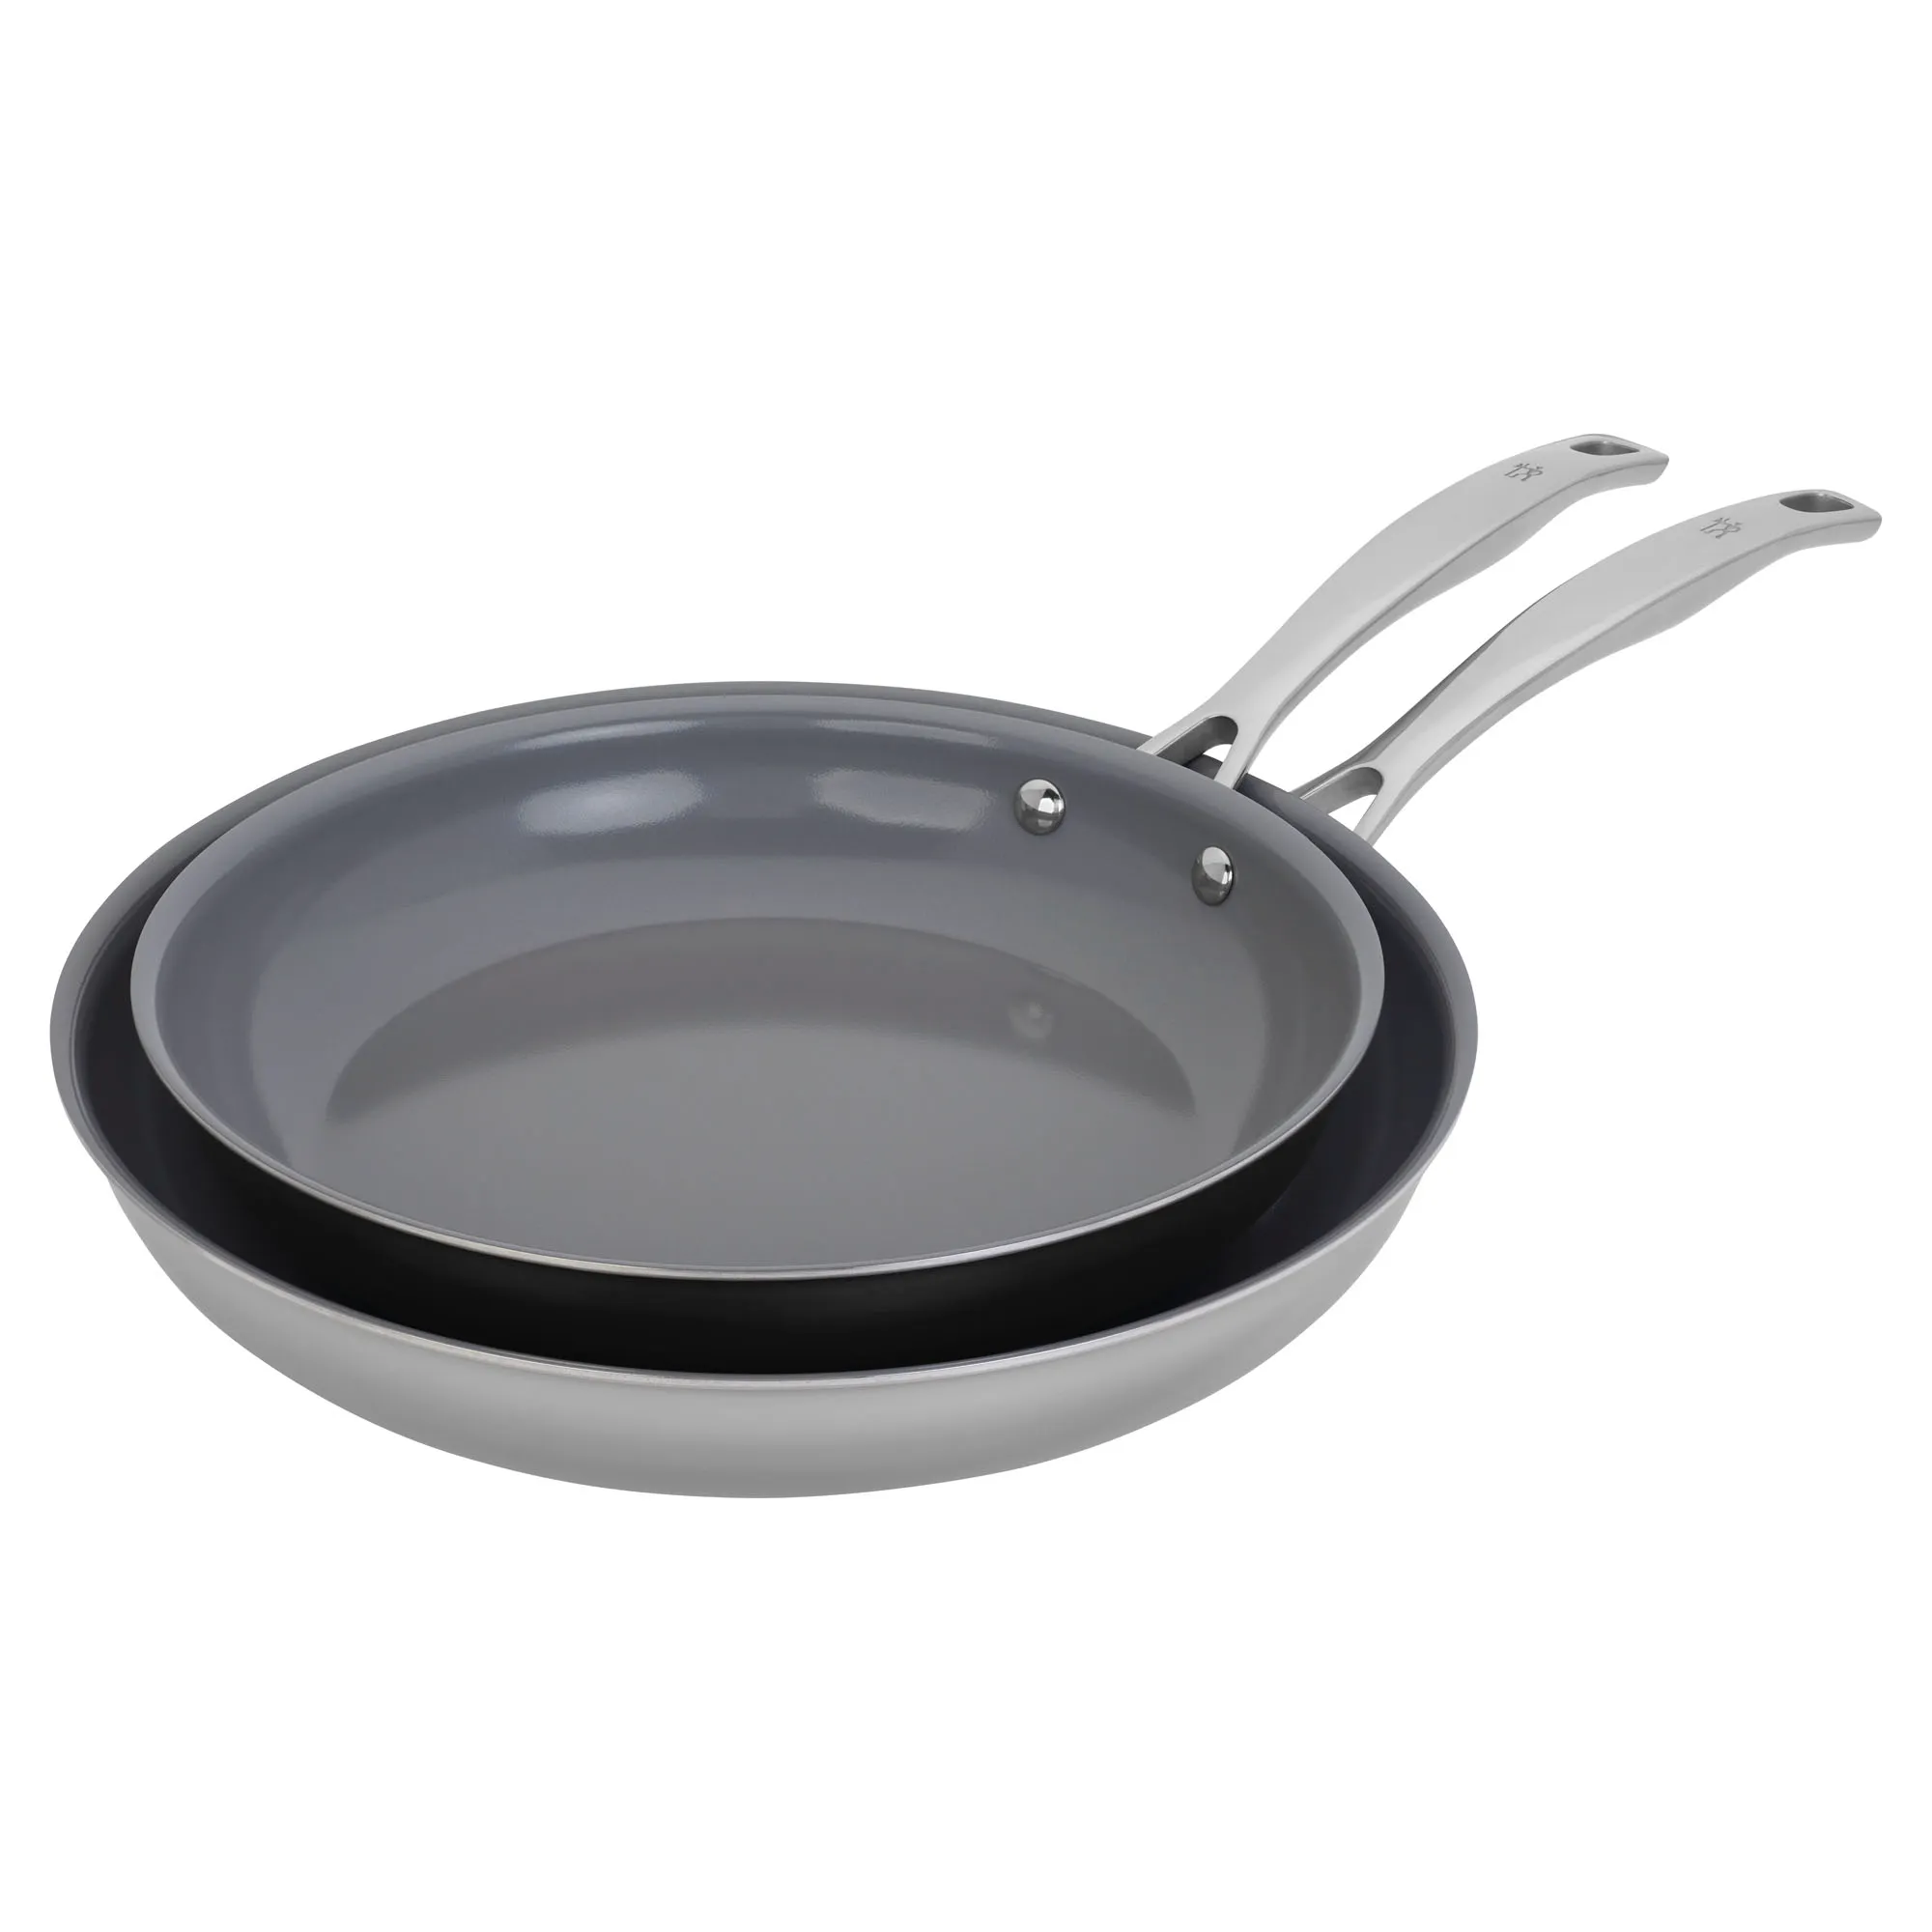 Zwilling Clad Cfx 12-inch Stainless Steel Ceramic Nonstick Fry Pan